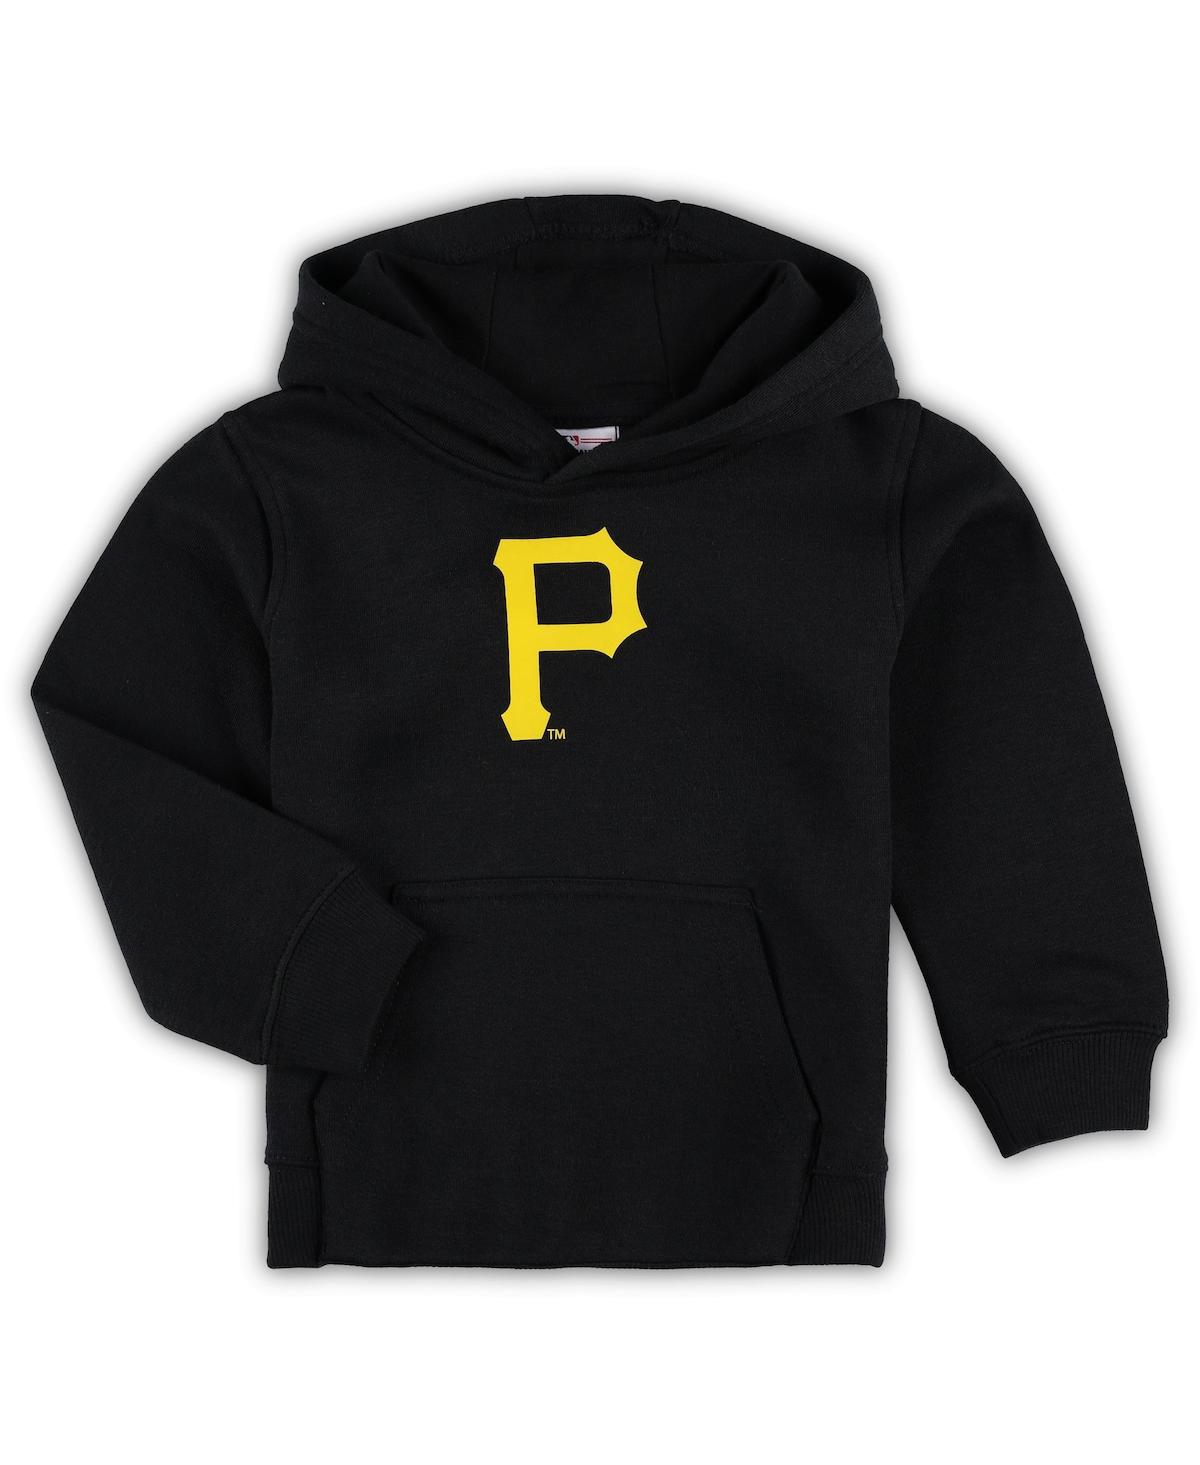 Outerstuff Babies' Toddler Boys And Girls Black Pittsburgh Pirates Team Primary Logo Fleece Pullover Hoodie